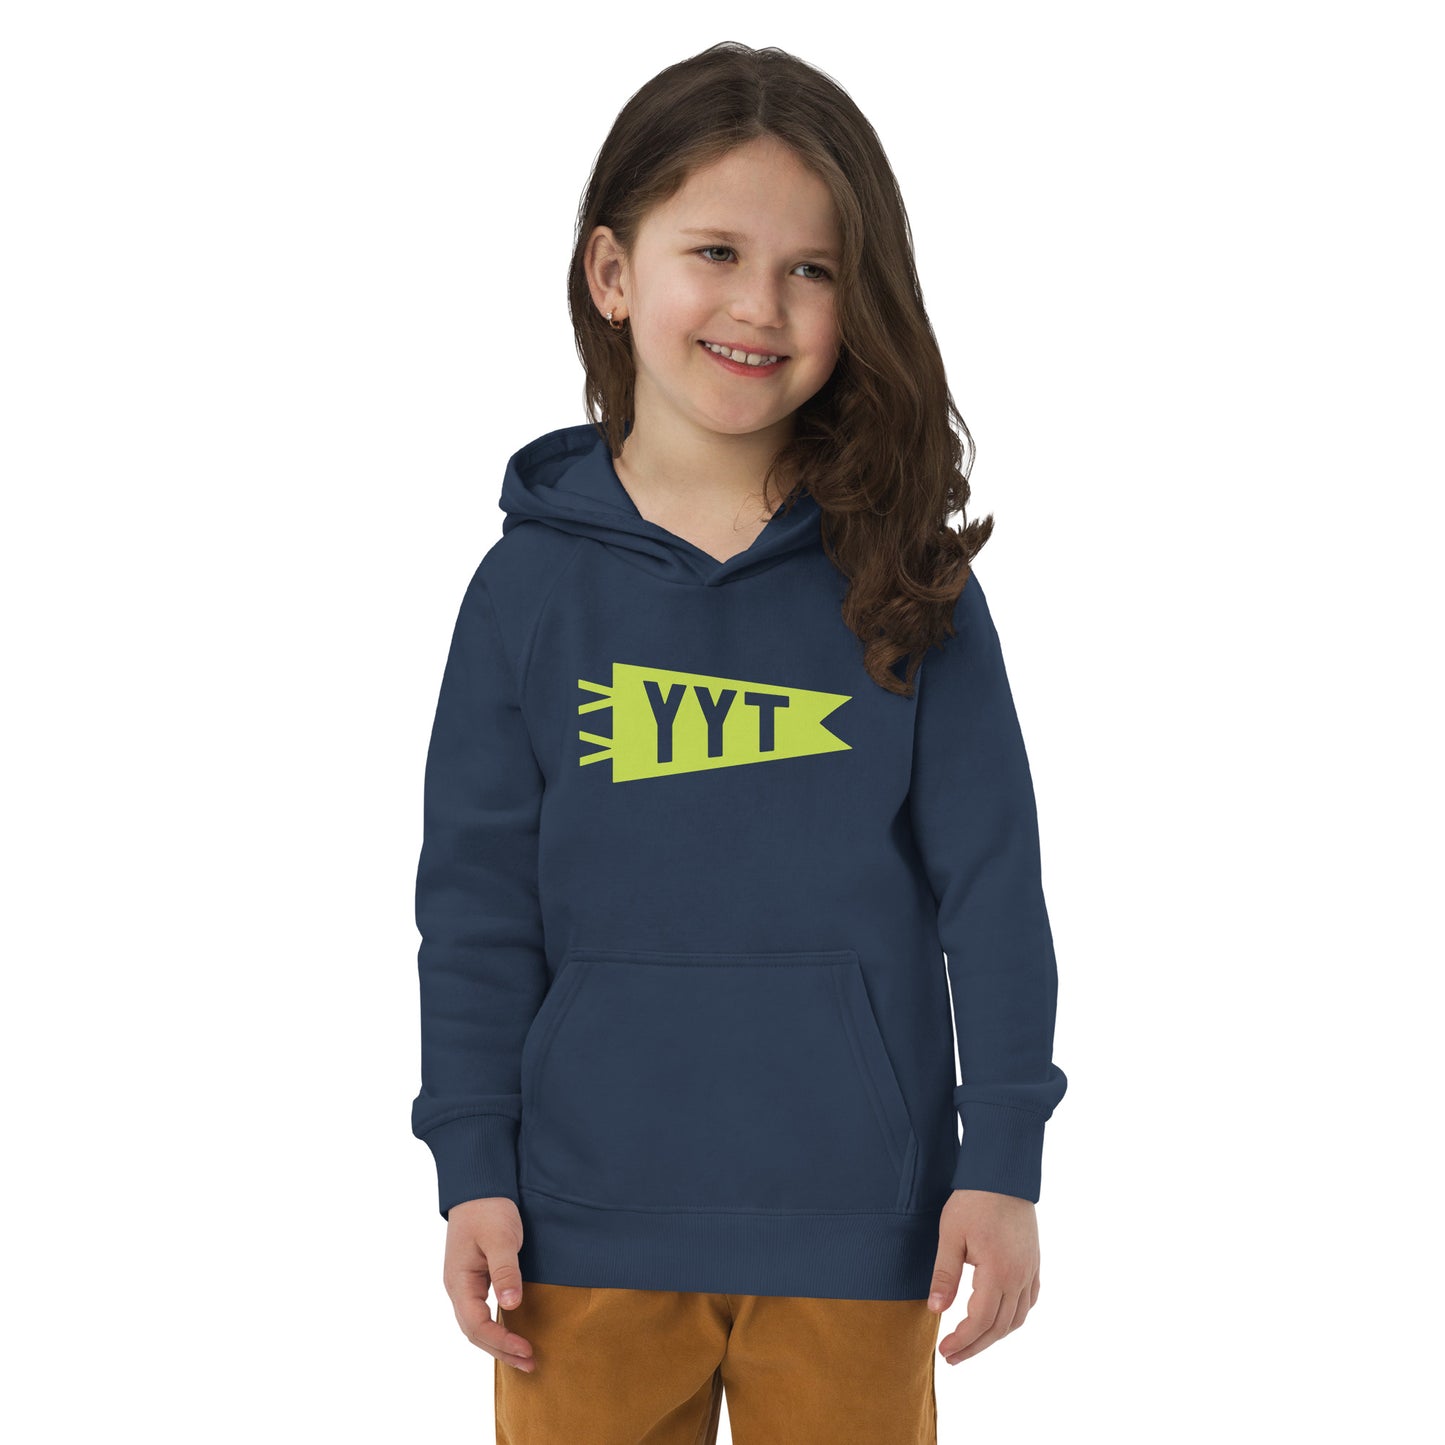 Kid's Sustainable Hoodie - Green Graphic • YYT St. John's • YHM Designs - Image 07